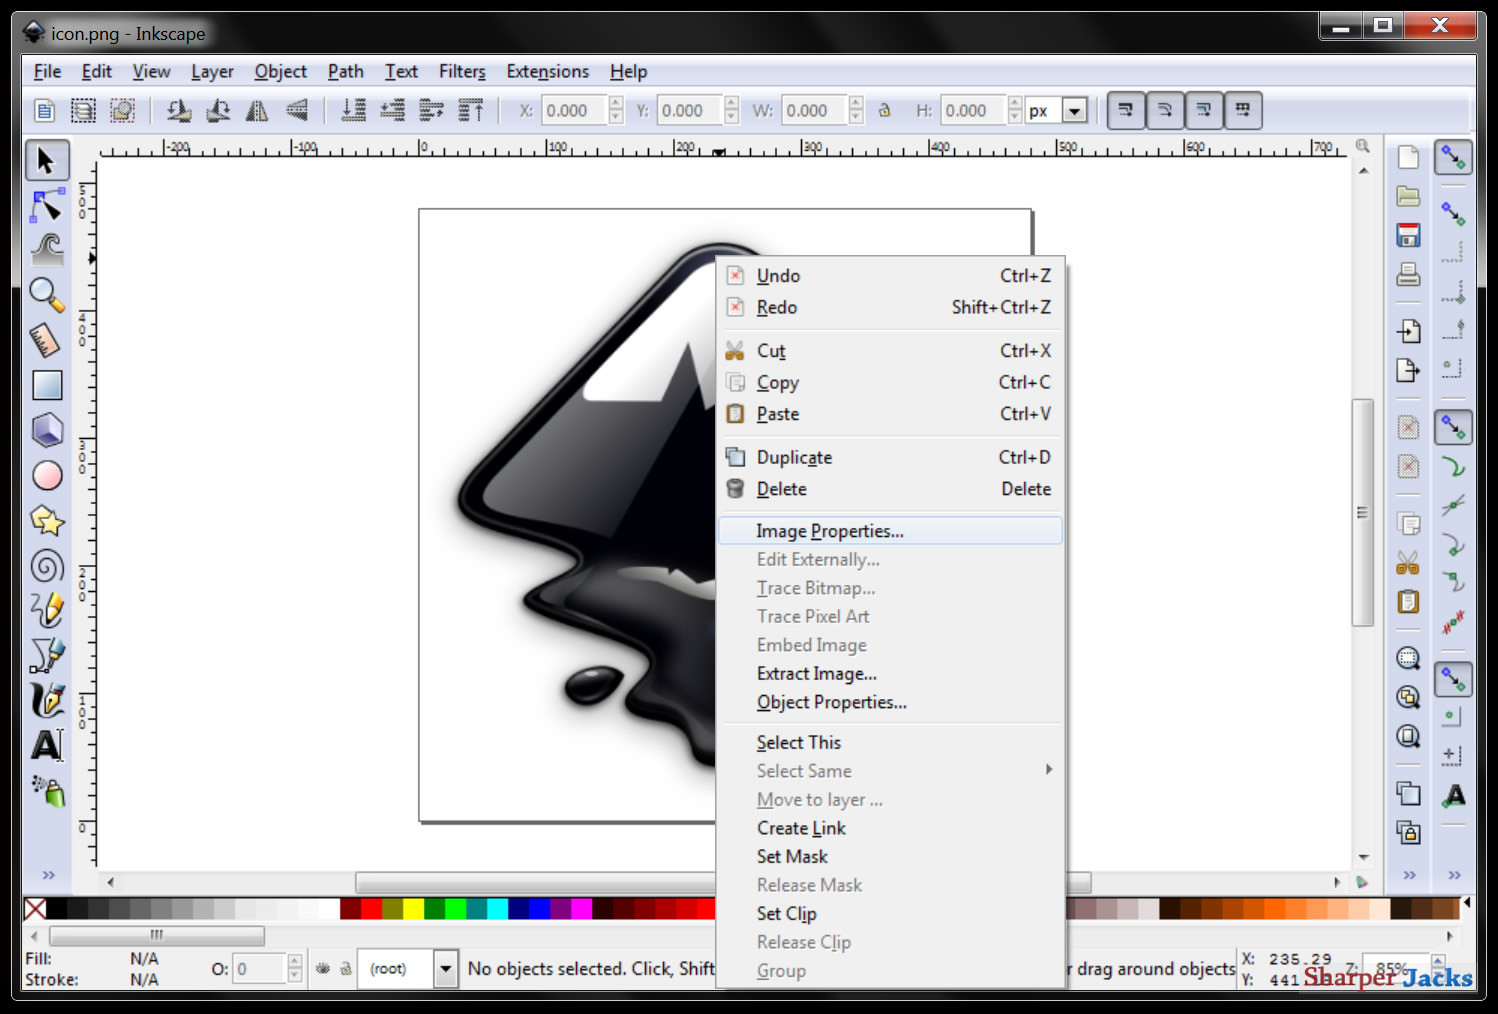 inkscape vector graphics editor free download